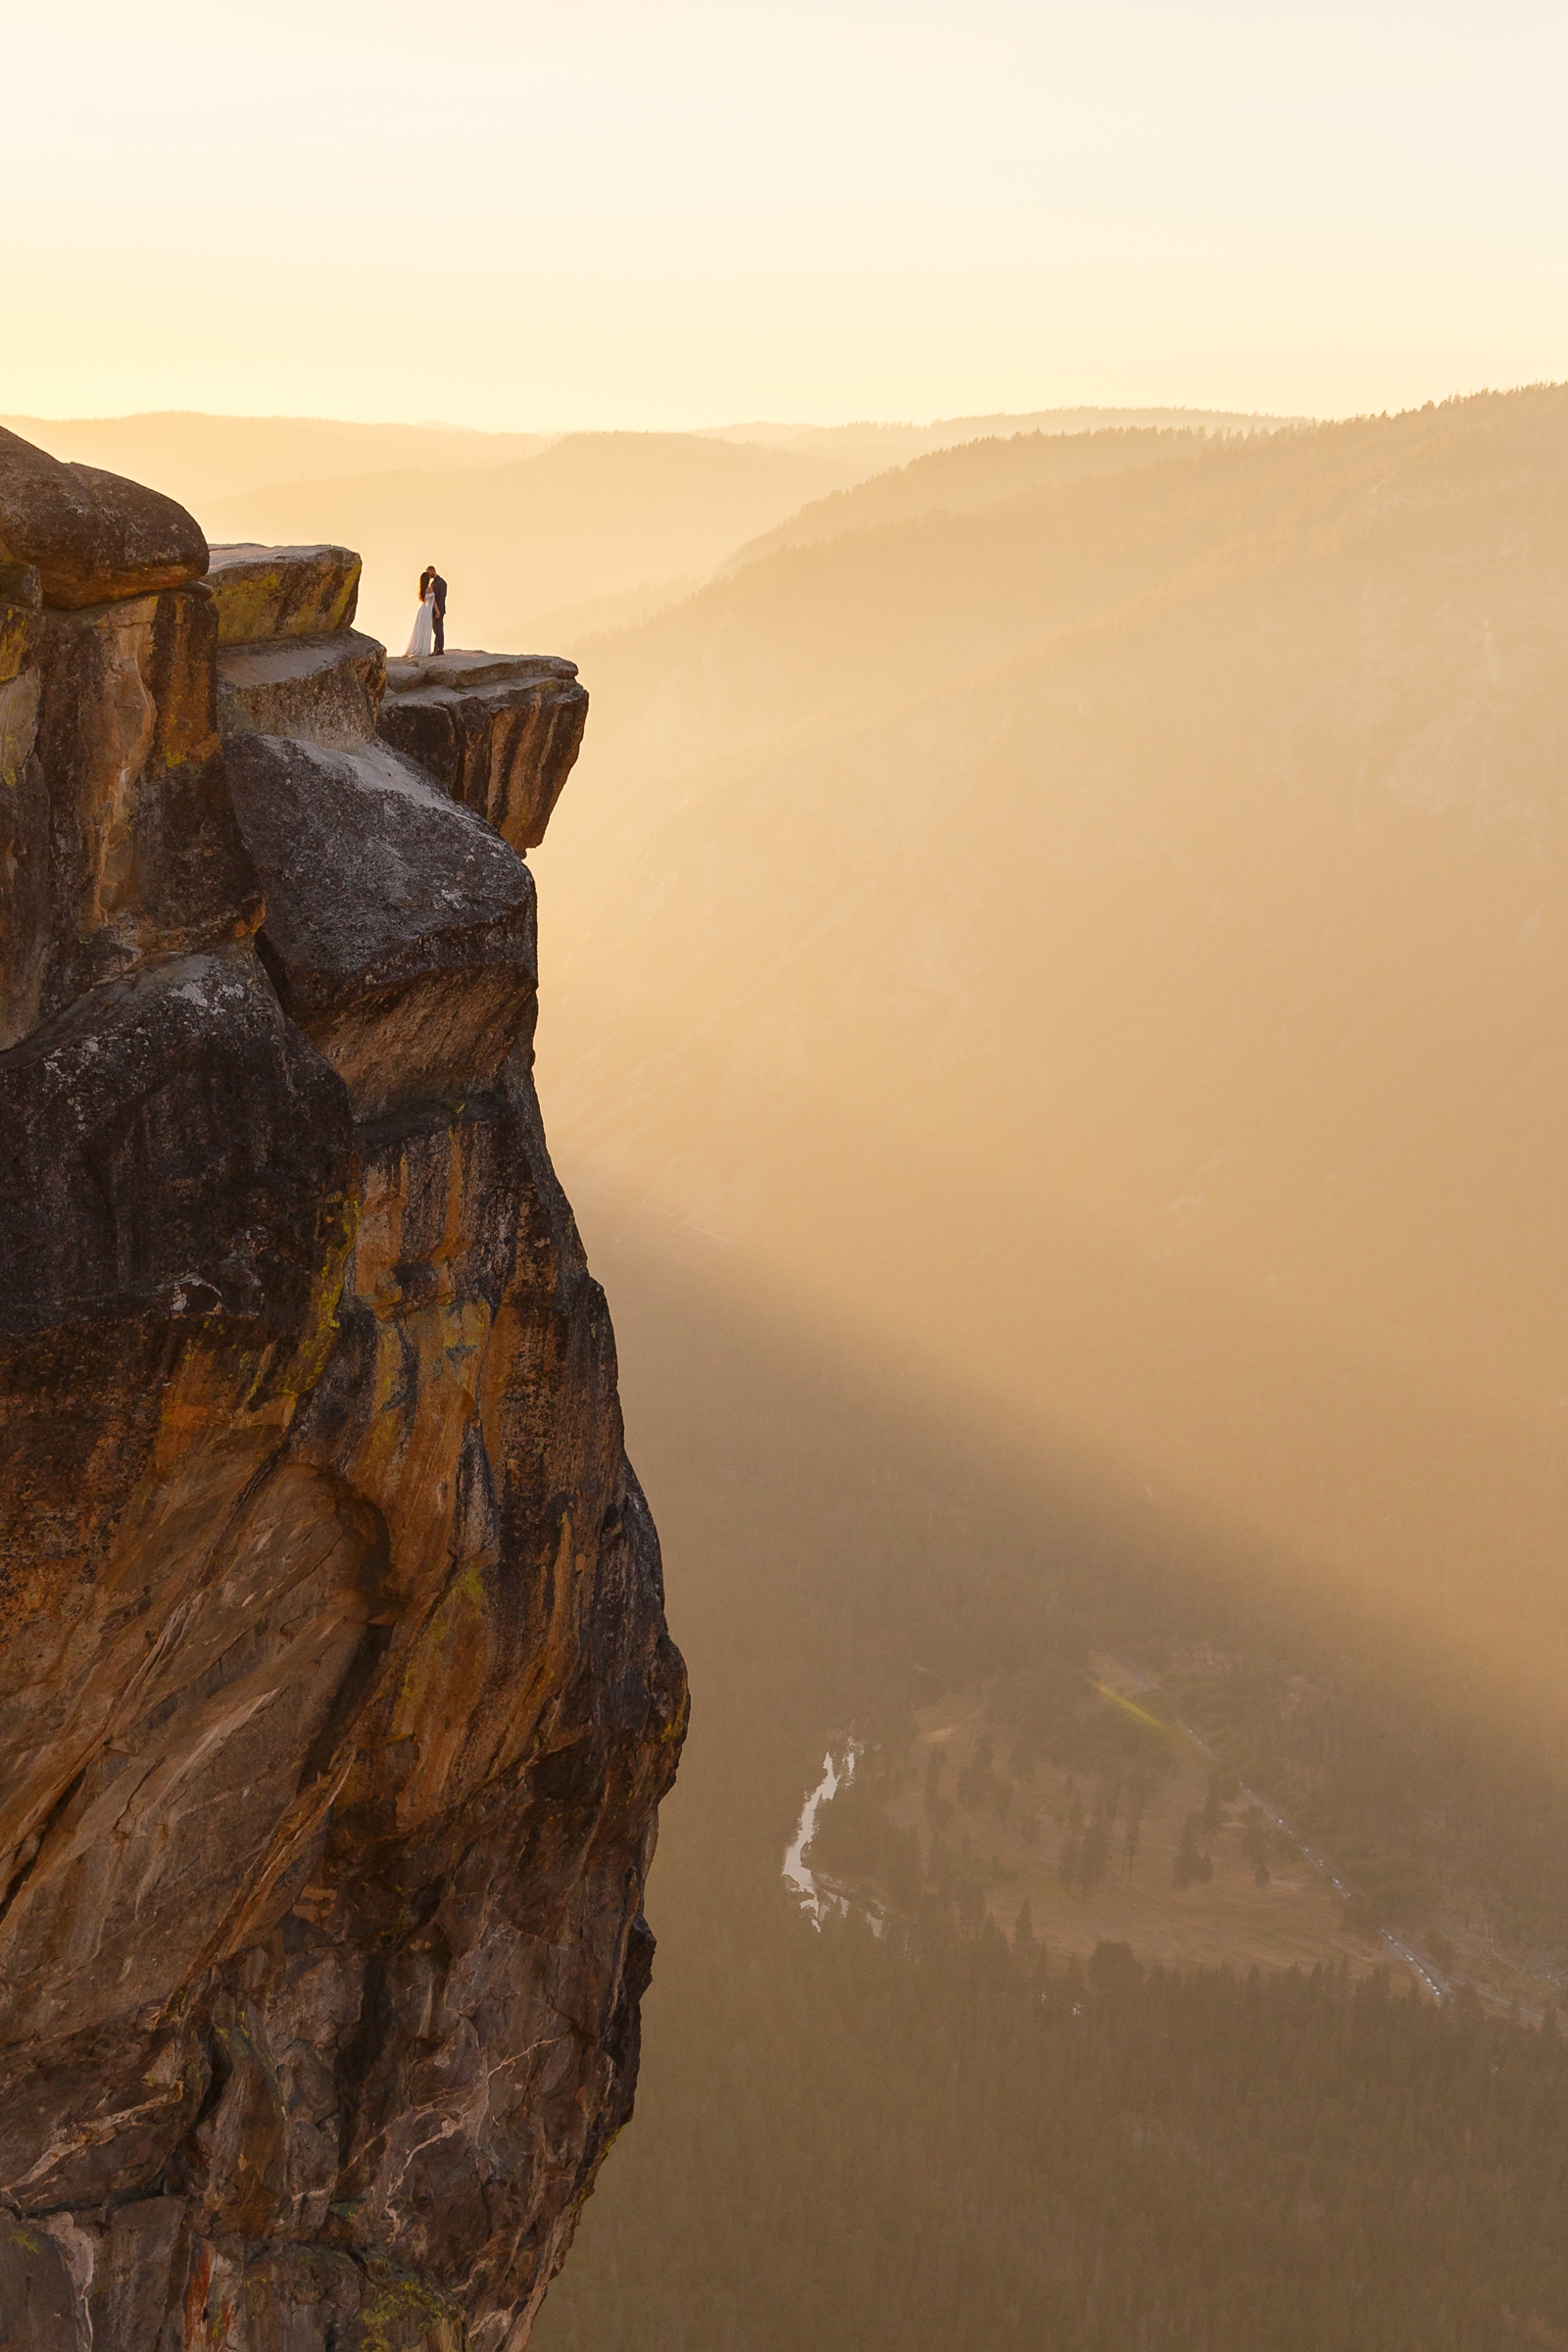 Intimate elopement on the edge of a cliff in Yosemite.